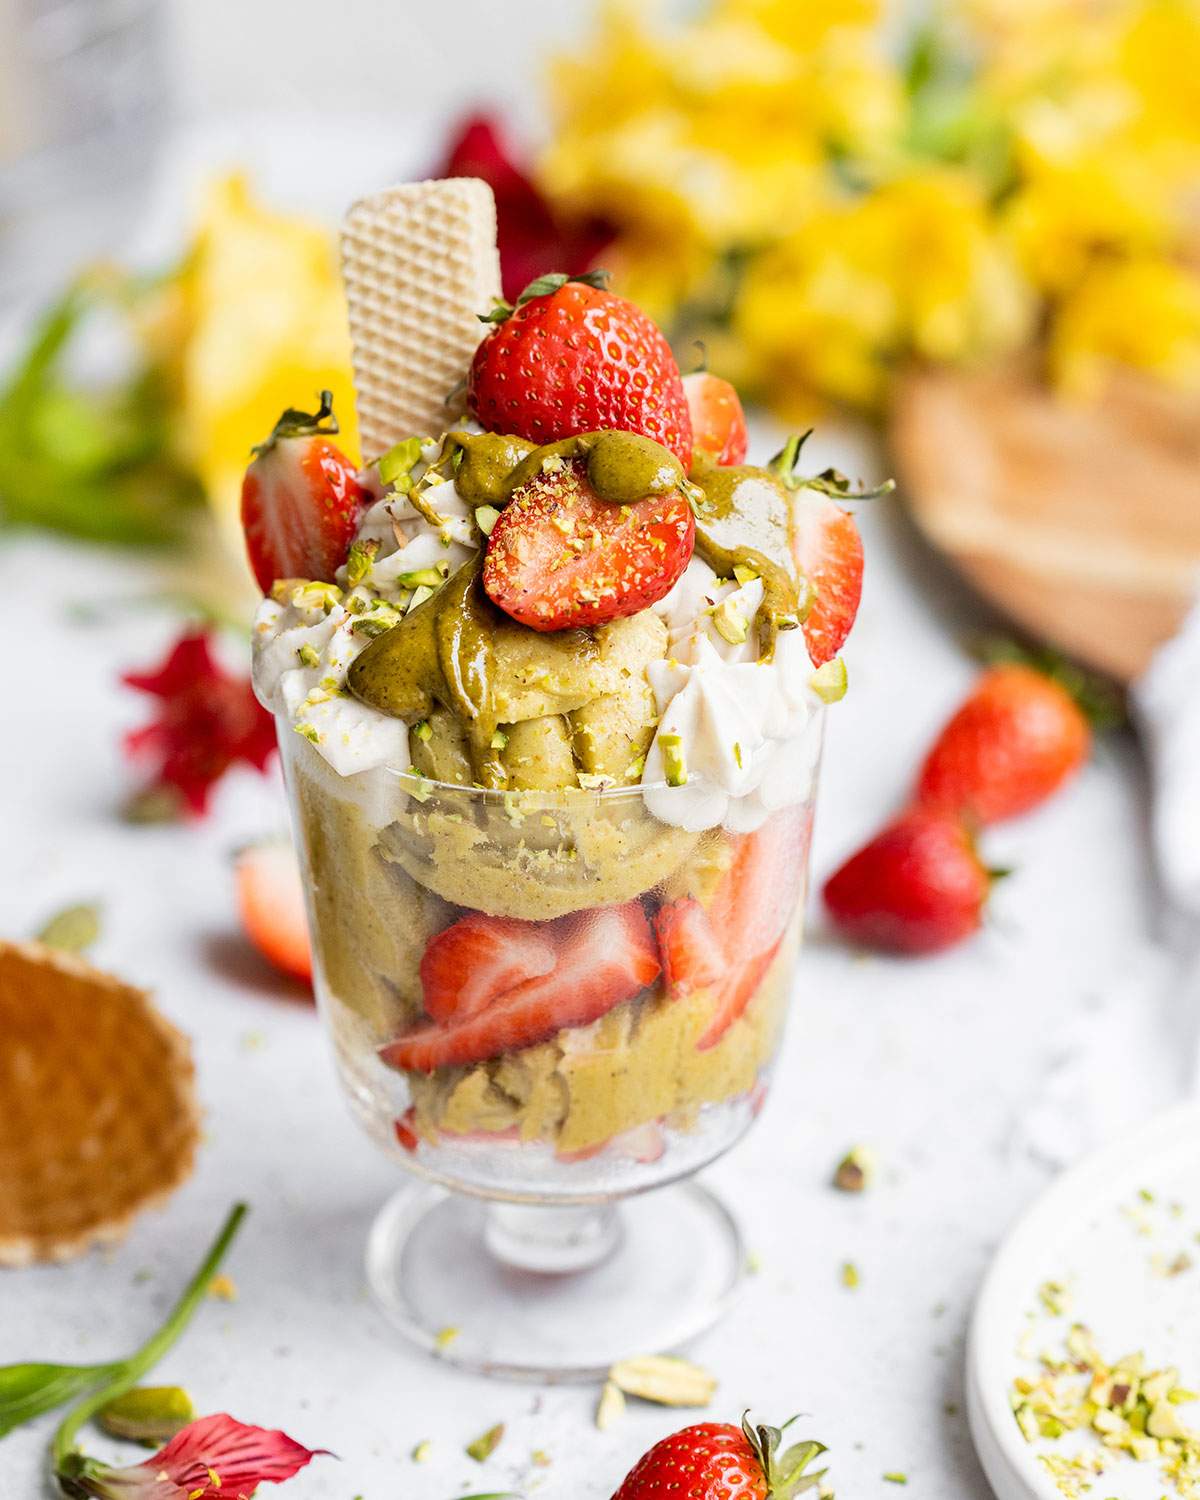 A jar of pistachio ice cream, decorated with fresh strawberries, whipped cream and smooth pistachio butter.